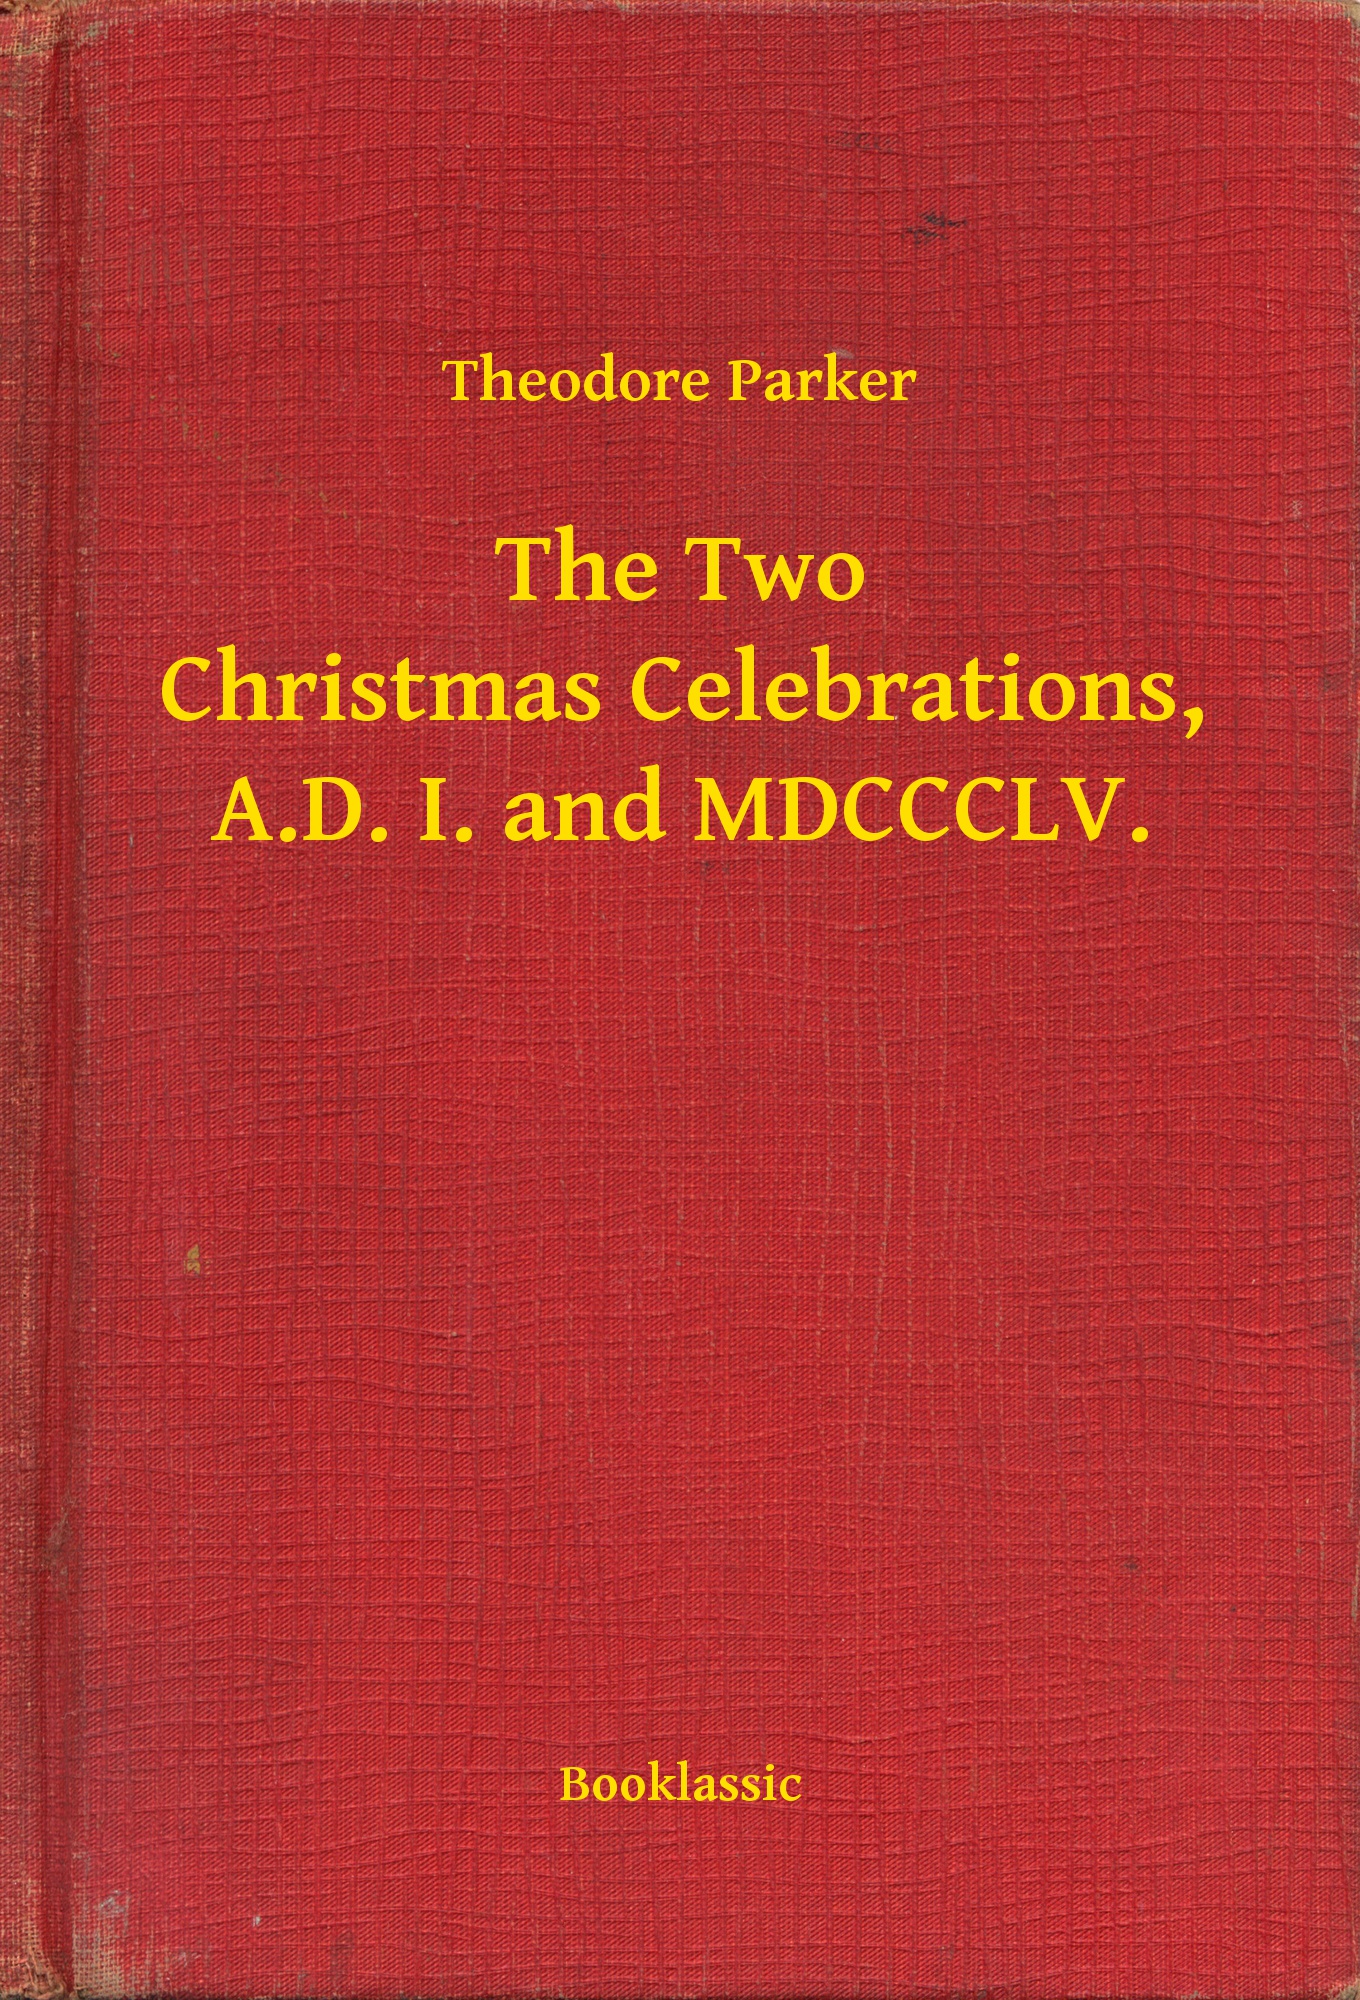 The Two Christmas Celebrations, A.D. I. and MDCCCLV.